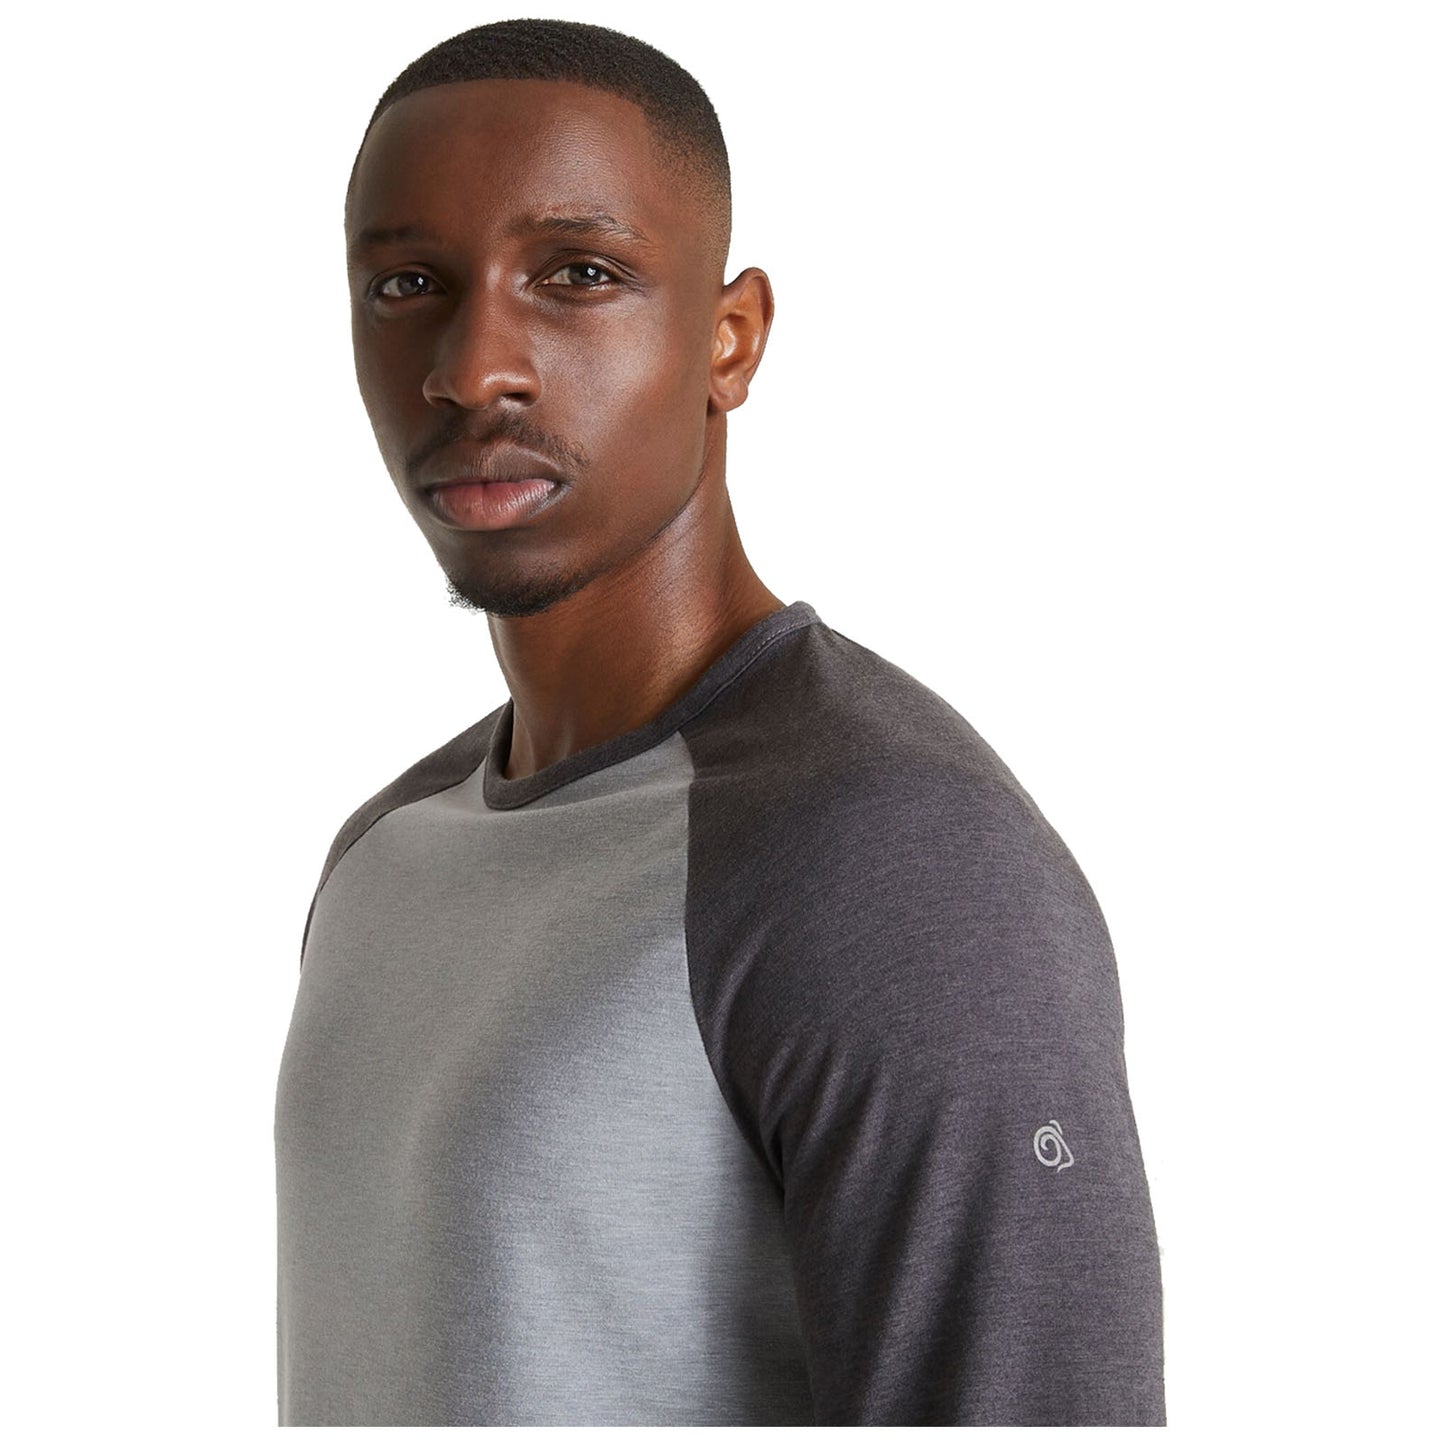 Craghoppers Mens First Layer Long Sleeve T-Shirt